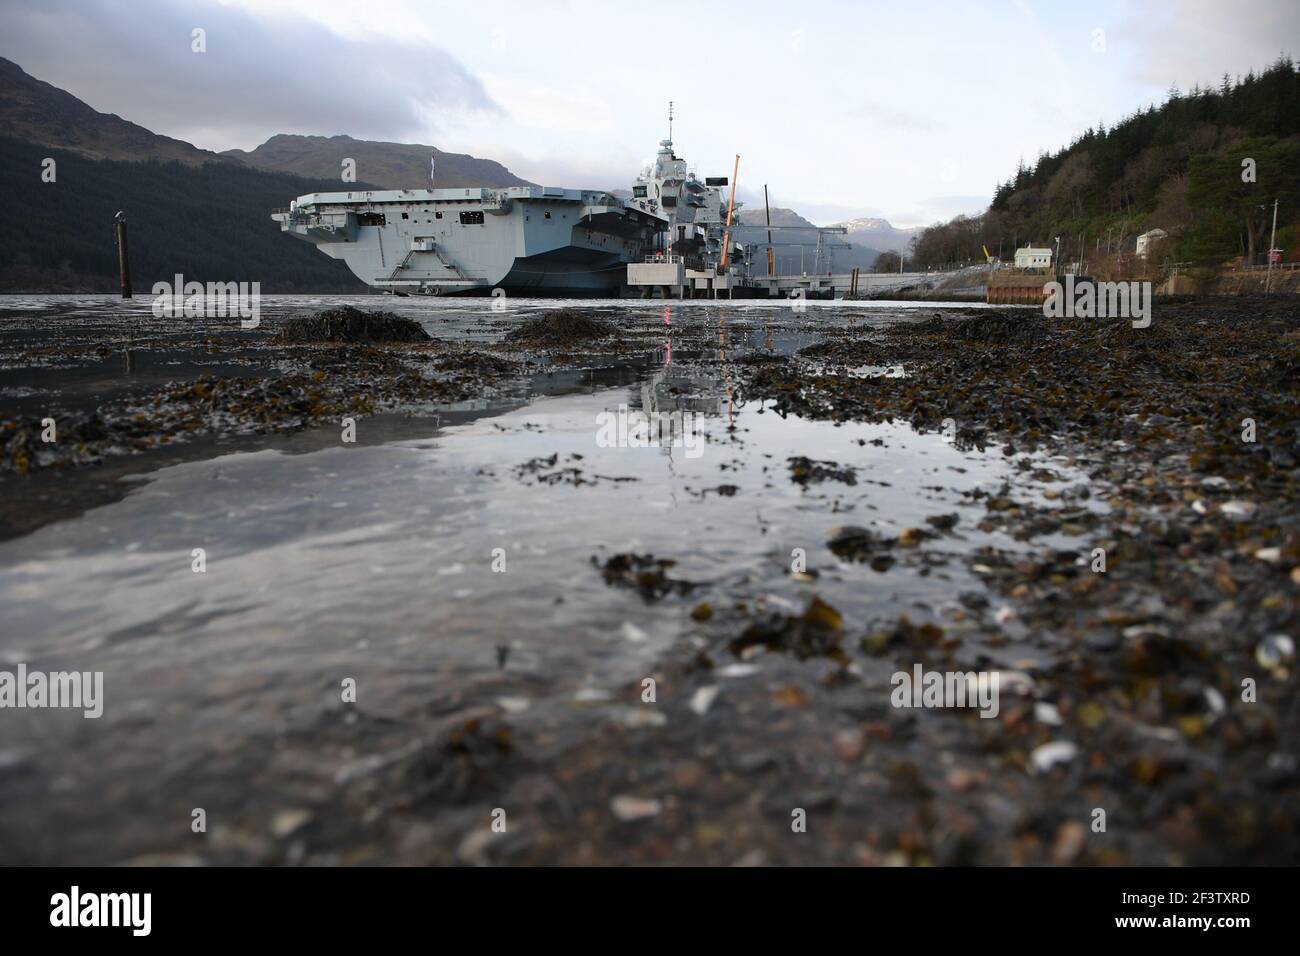 Finnart, Loch Long, Scotland, UK. 17 March 2021.  PICTURED: HMS Queen Elizabeth is the largest and most advanced warships ever built for the Royal Navy. Both HMS Queen Elizabeth (pictured) and HMS Prince of Wales are the nation's flagships which weigh in a 65,000 tonnes and measure 280 meters in length. The Aircraft Carrier is currently berthed on the side of Long Loch at Glen Mallan taking on fuel, munitions  and other supplies, ahead of naval exercises which are part of the UK Carrier Strike Group 2021. The ship is due to leave on Sunday. Credit: Colin Fisher/Alamy Live News. Stock Photo